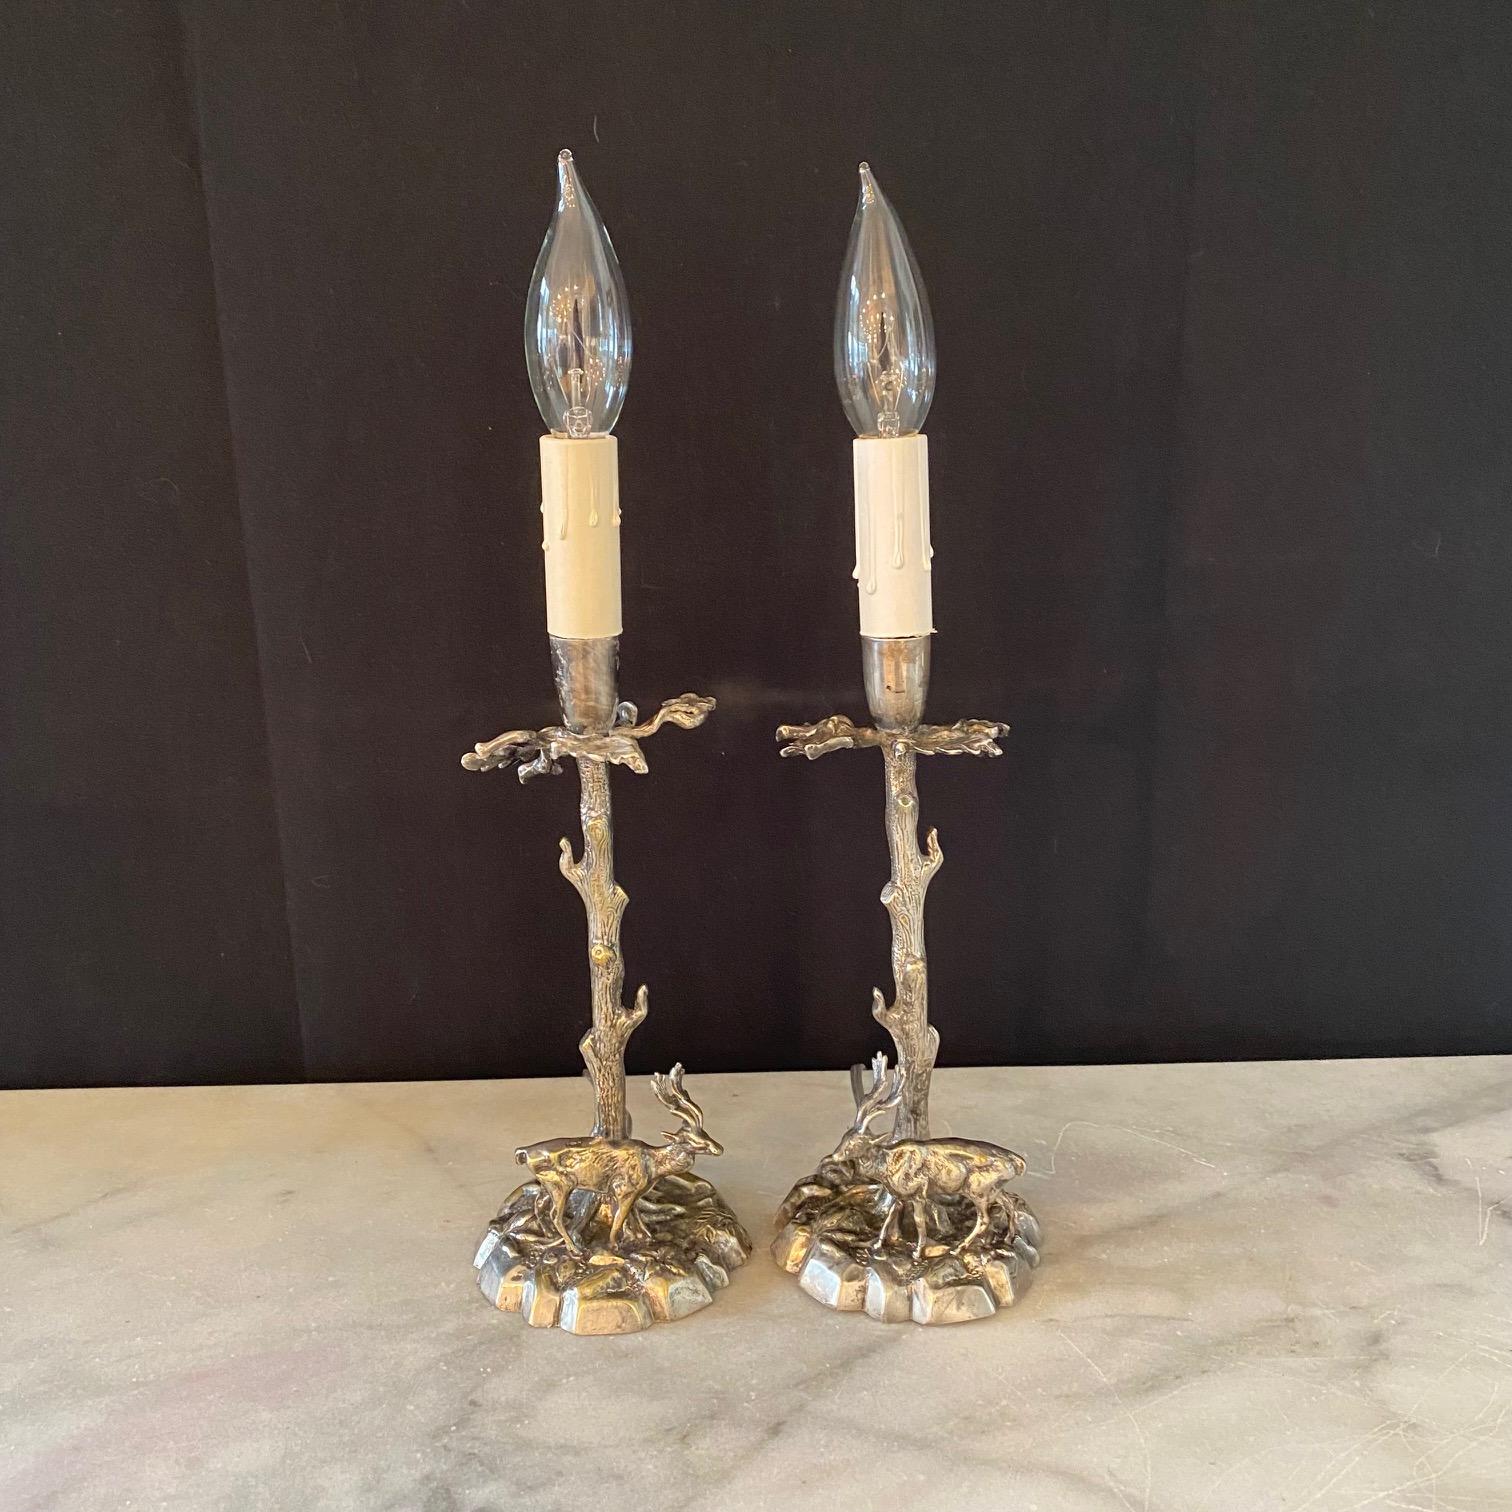  Fine Pair Valenti Style Spanish Silver Plated Bronze Deer Sculpture Lamps  In Good Condition For Sale In Hopewell, NJ